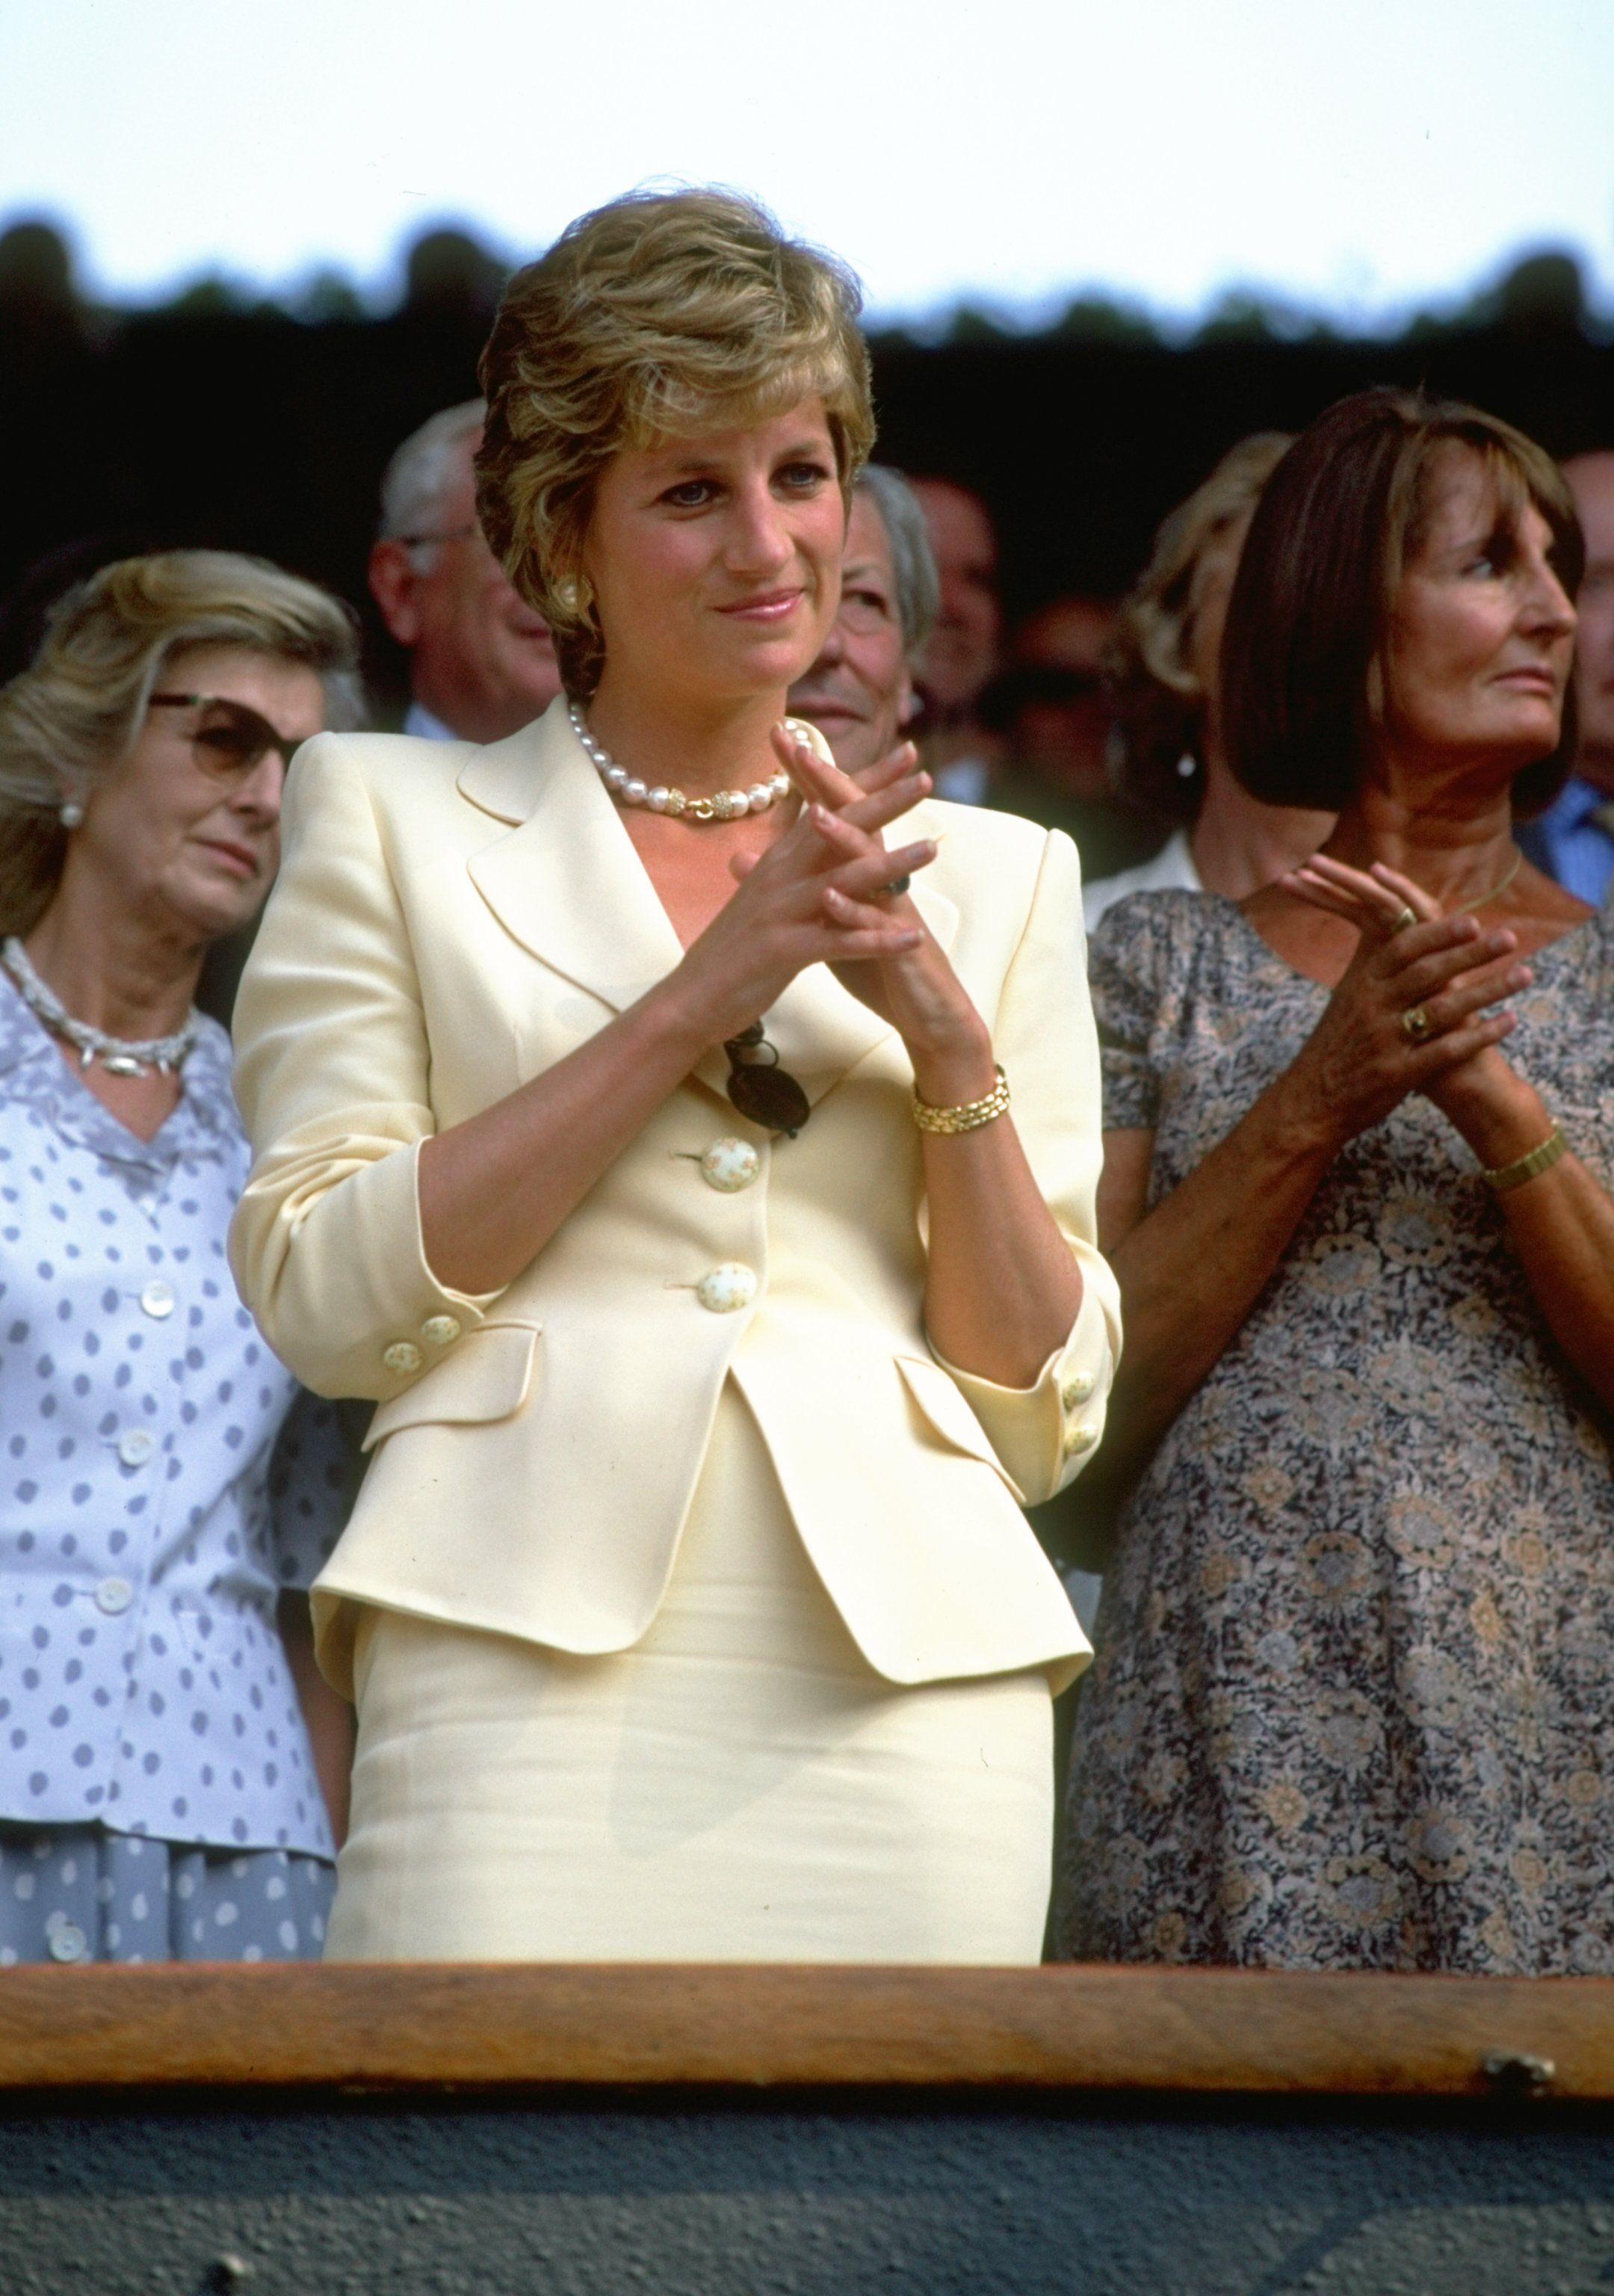 Diana, Princess of Wales aqt the Lawn Tennis Championships at Wimbledon in 1995 | Source: Getty Images